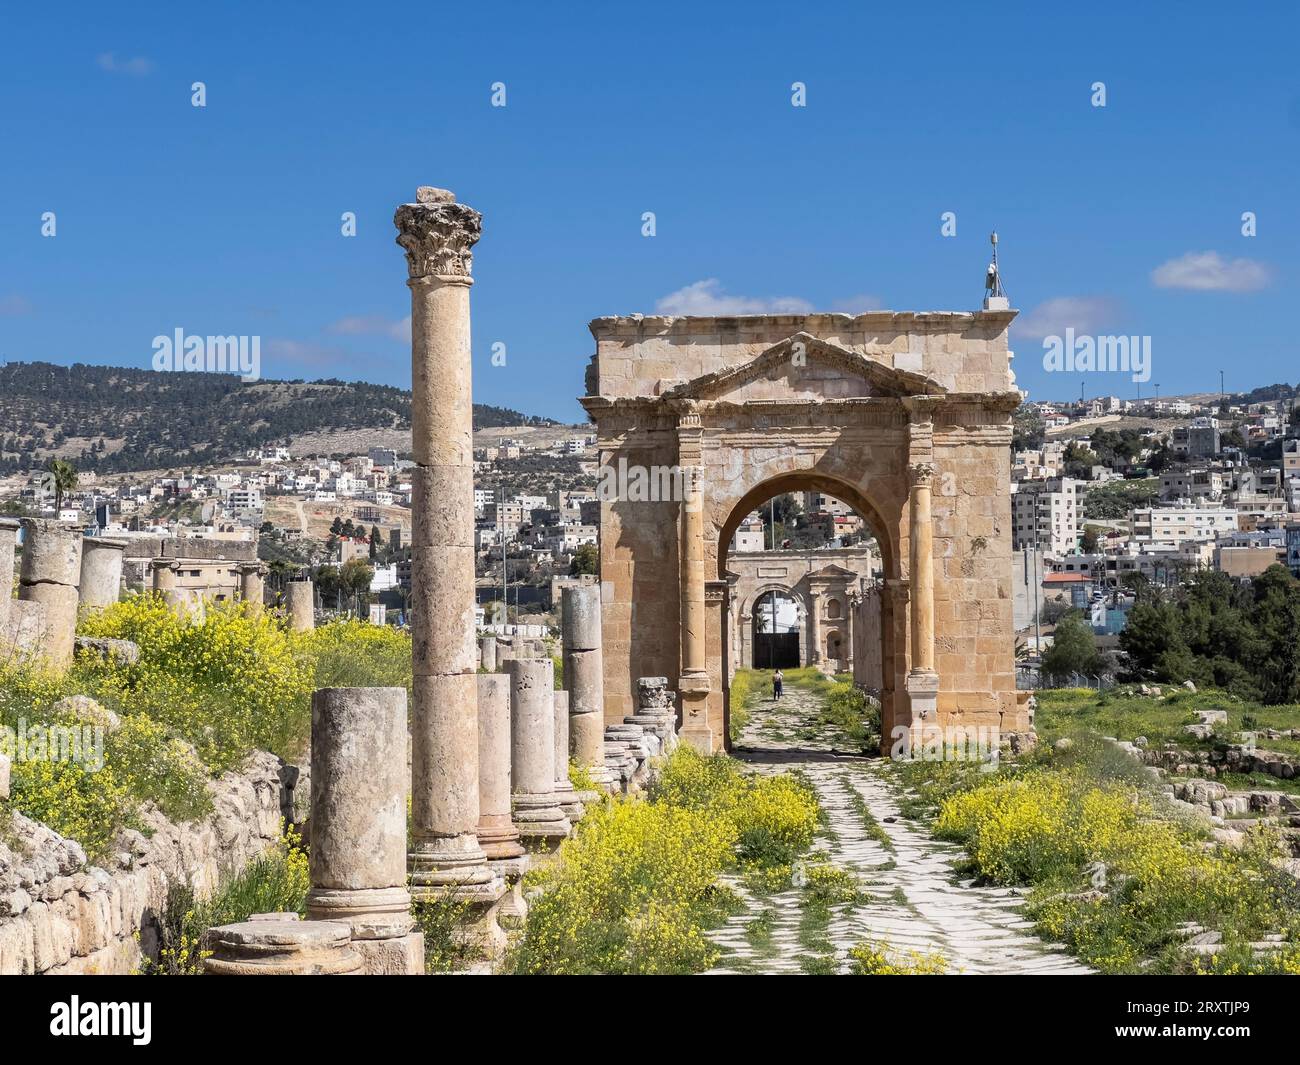 Columned archway in the ancient city of Jerash, believed to be founded in 331 BC by Alexander the Great, Jerash, Jordan, Middle East Stock Photo